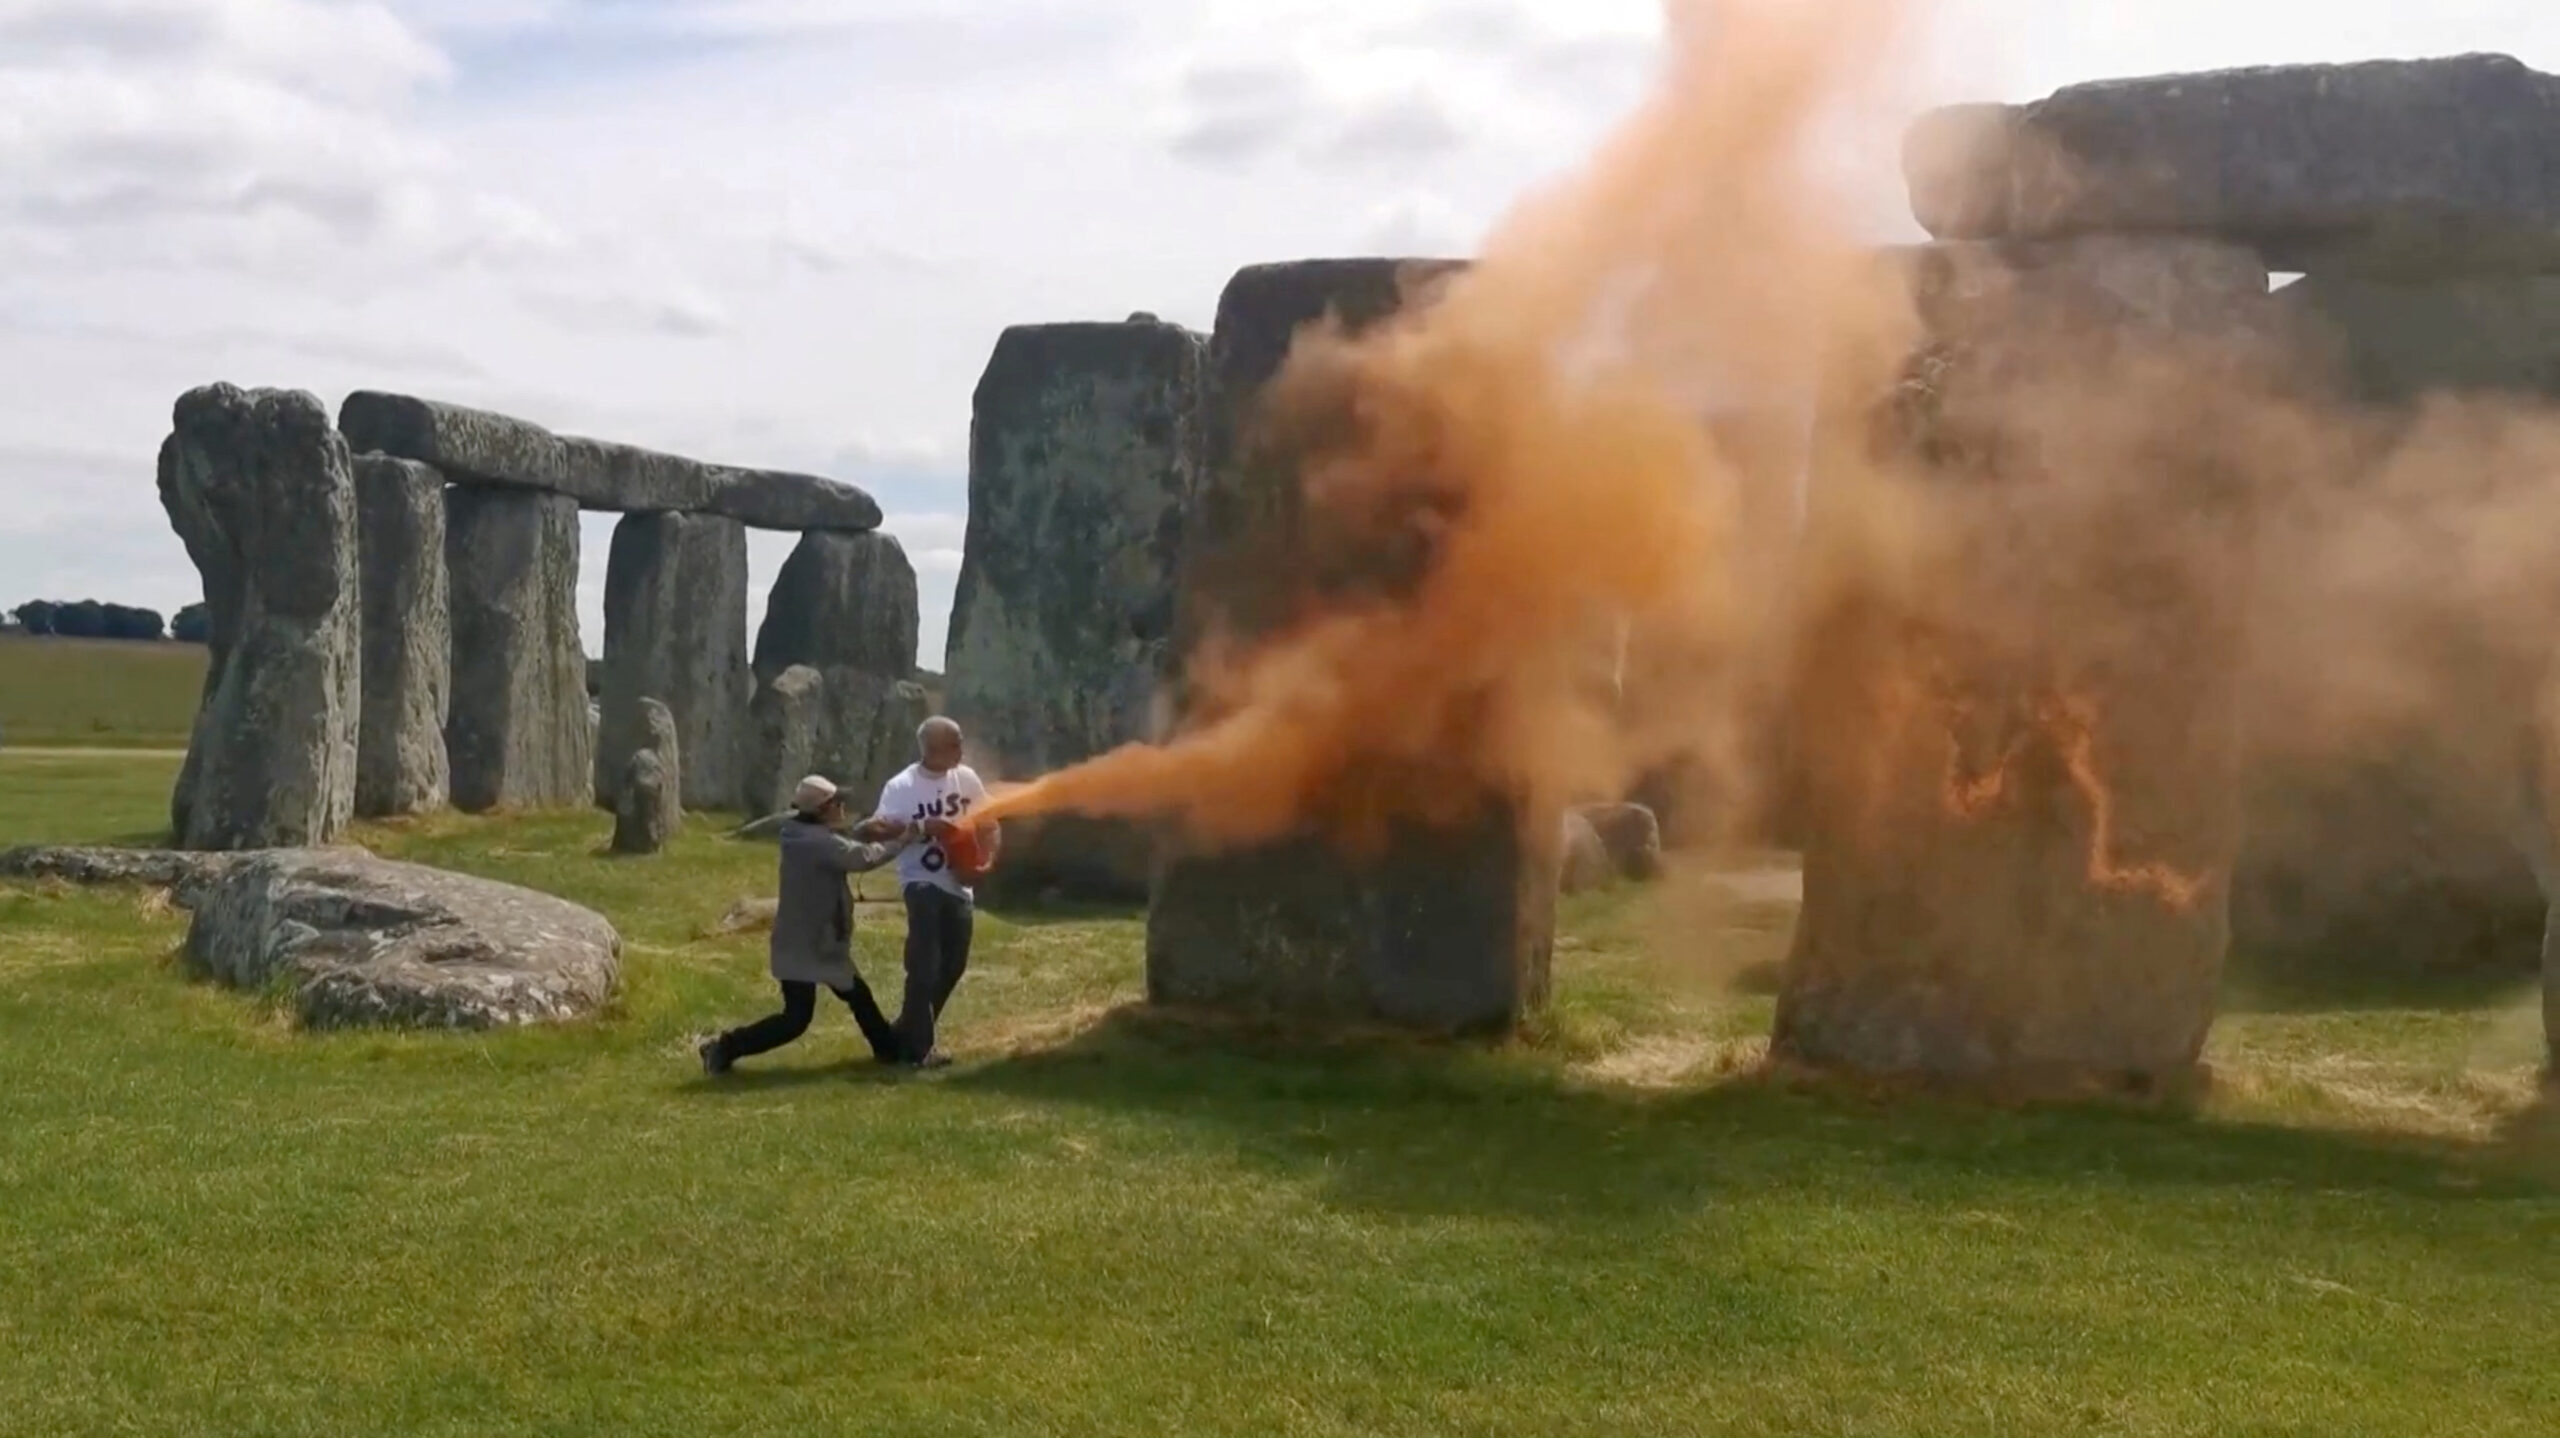 Orange paint protest at Stonehenge leads to arrests